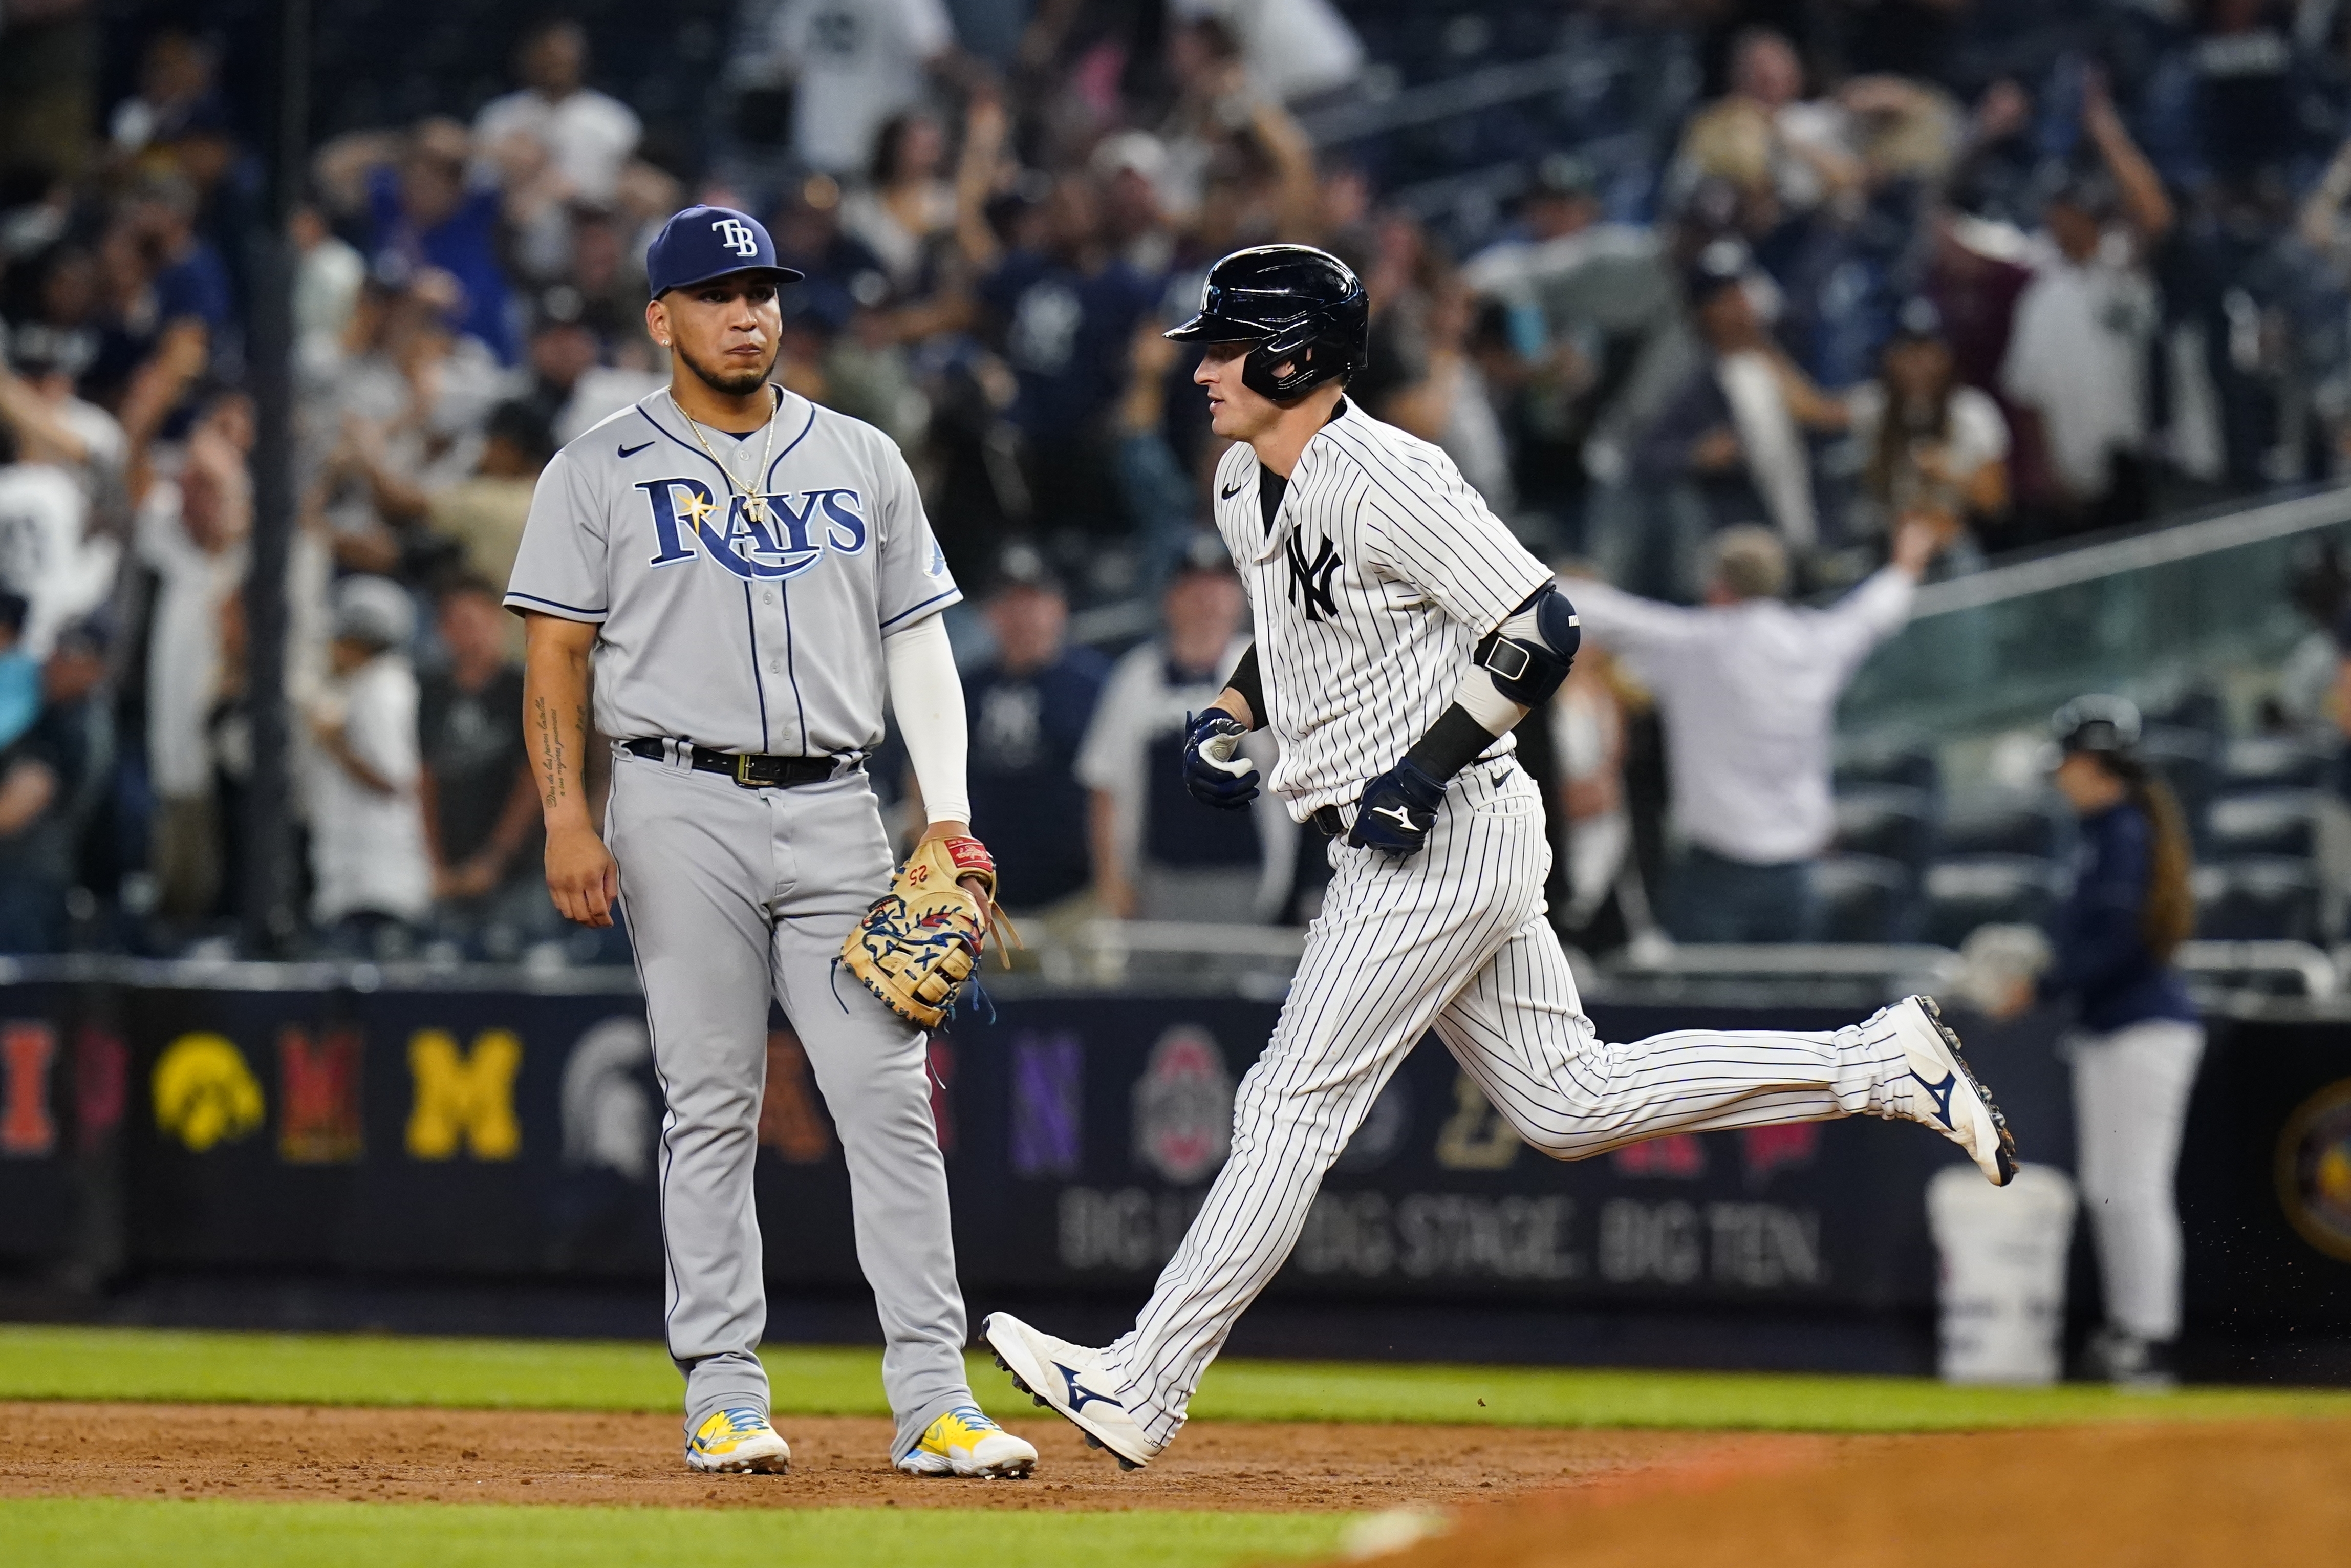 Yankees slam Rays in much-needed win, Josh Donaldson shows dad strength 